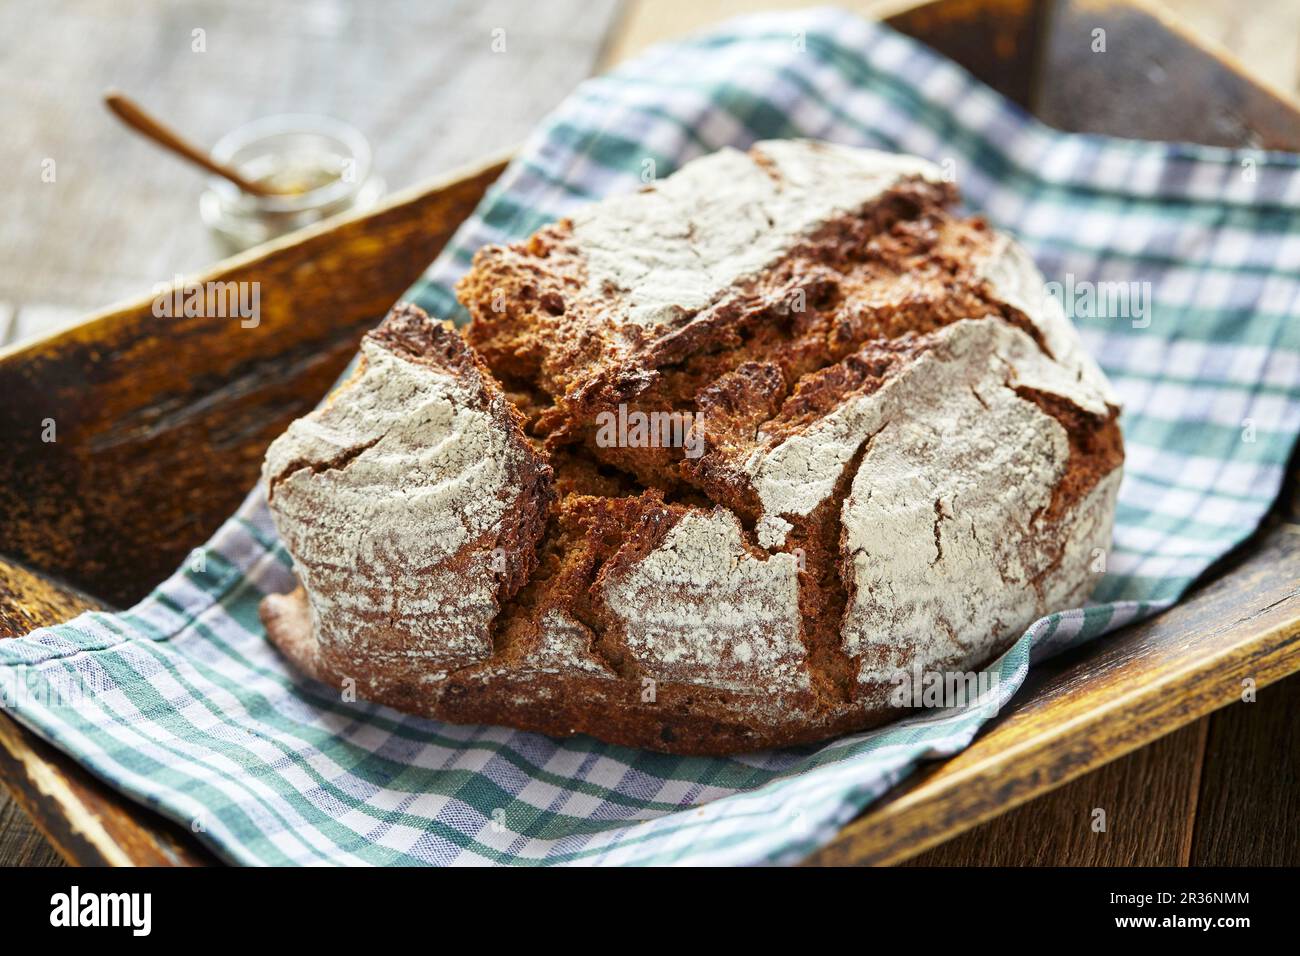 Rustic country bread on a checked napkin Stock Photo